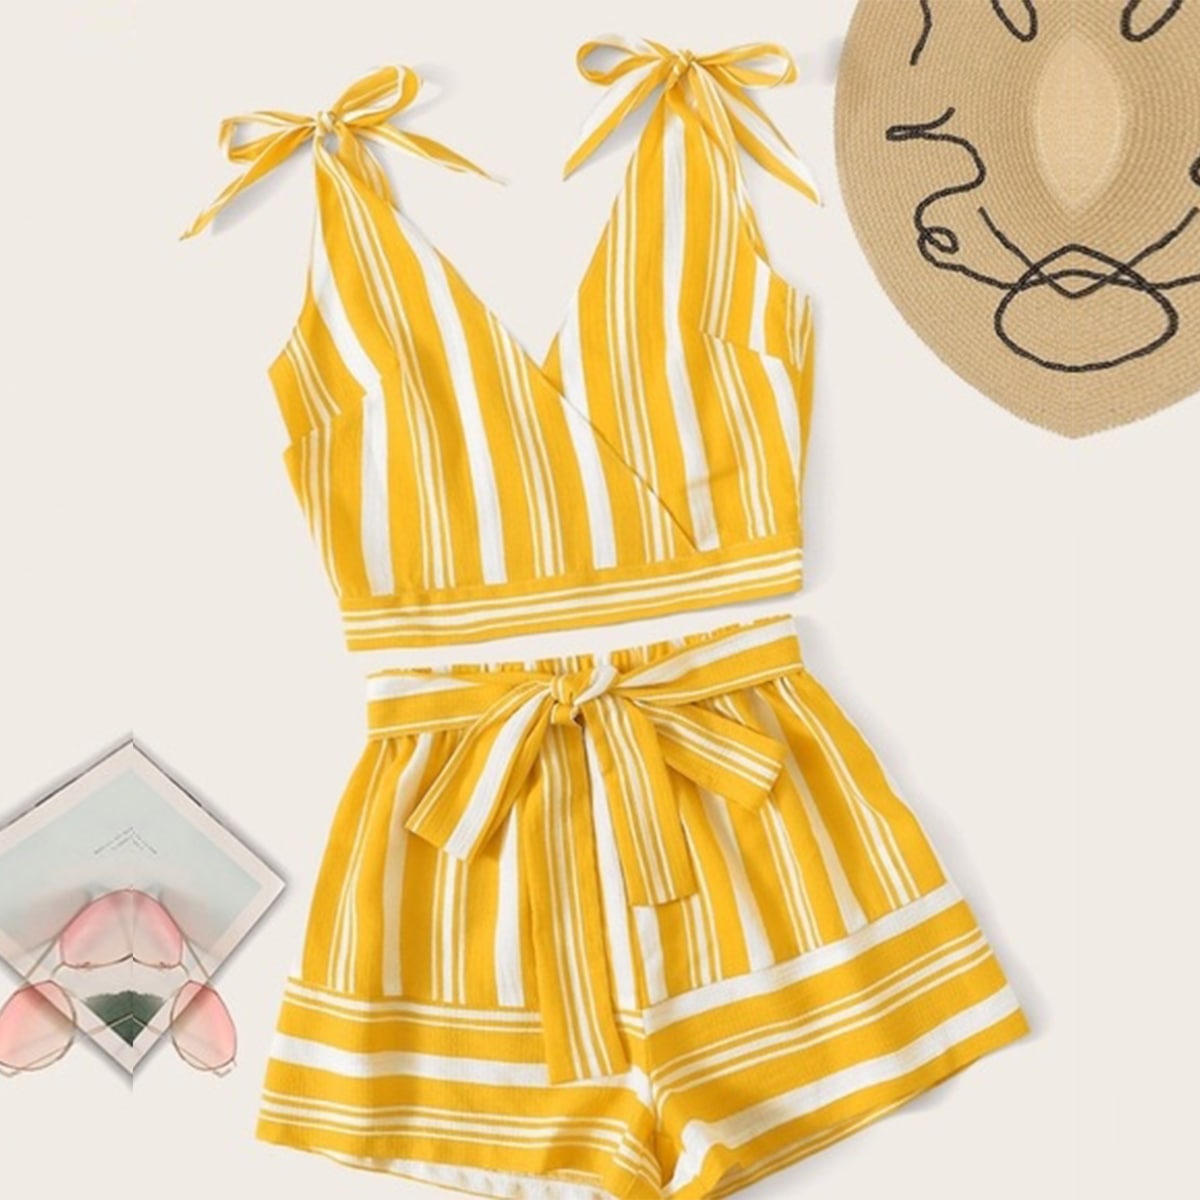 Crop Stylish Yellow Lining Top Sleeveless And Shorts For Baby Girls.